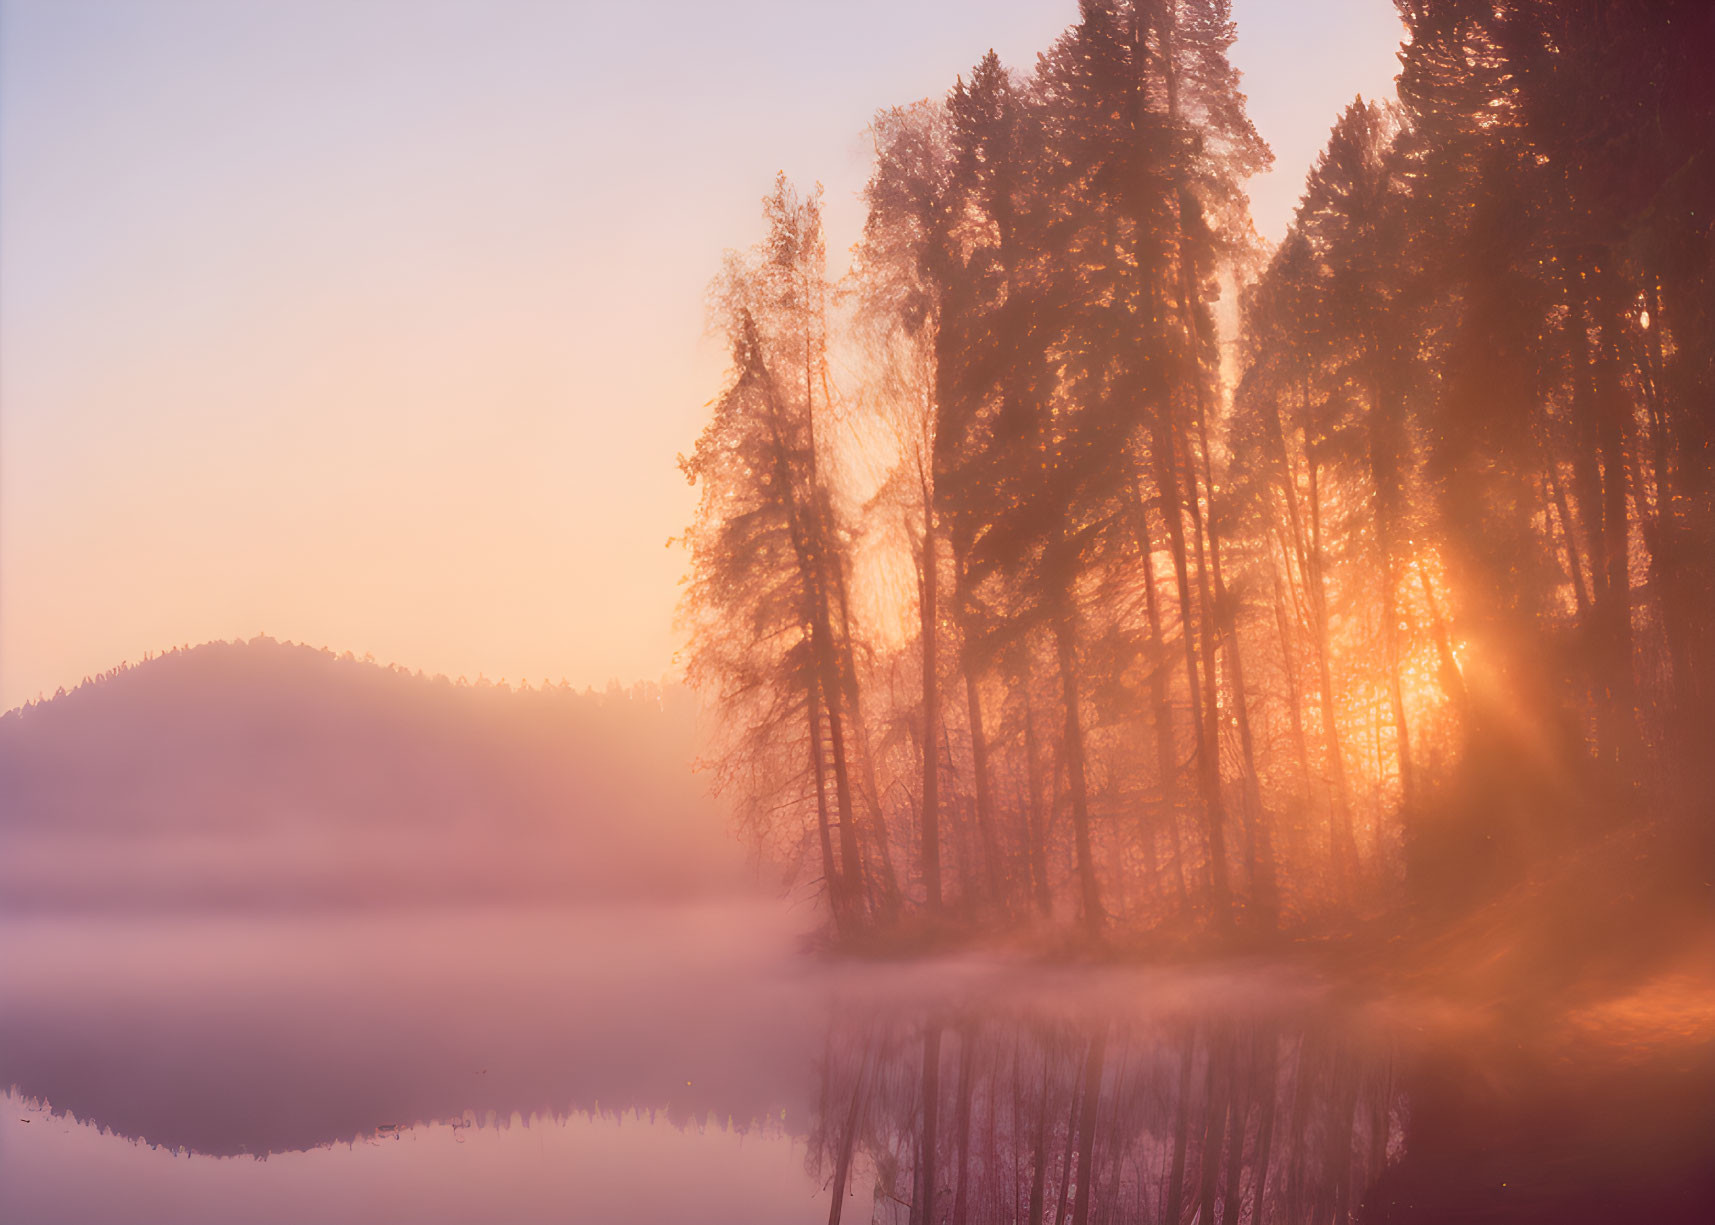 Tranquil lakeside sunrise with sunlight through trees